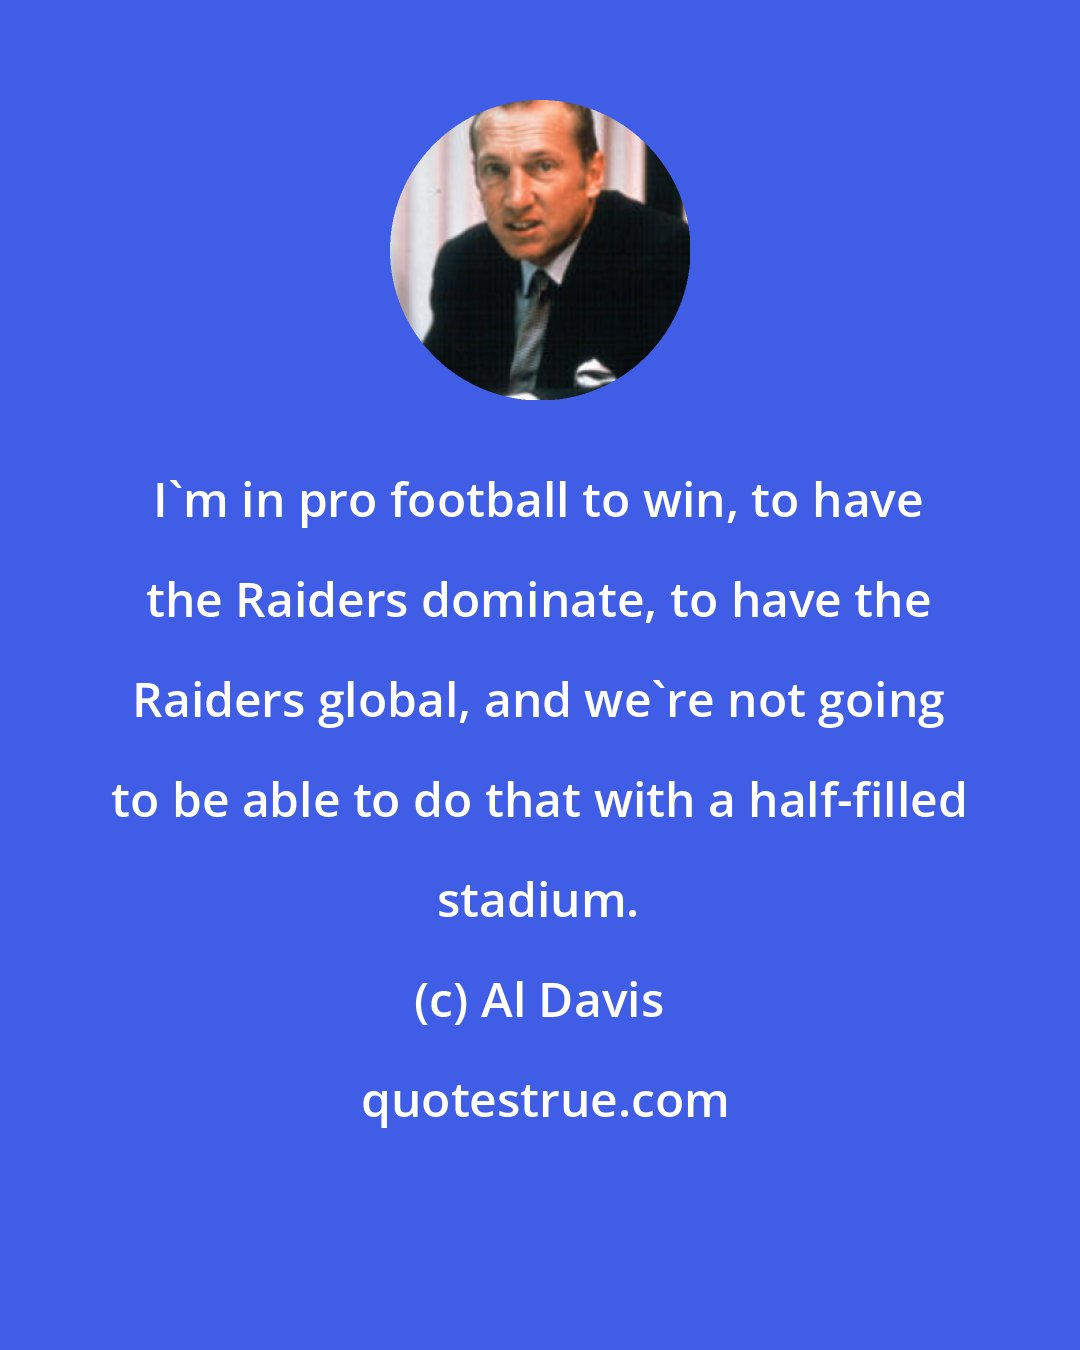 Al Davis: I'm in pro football to win, to have the Raiders dominate, to have the Raiders global, and we're not going to be able to do that with a half-filled stadium.